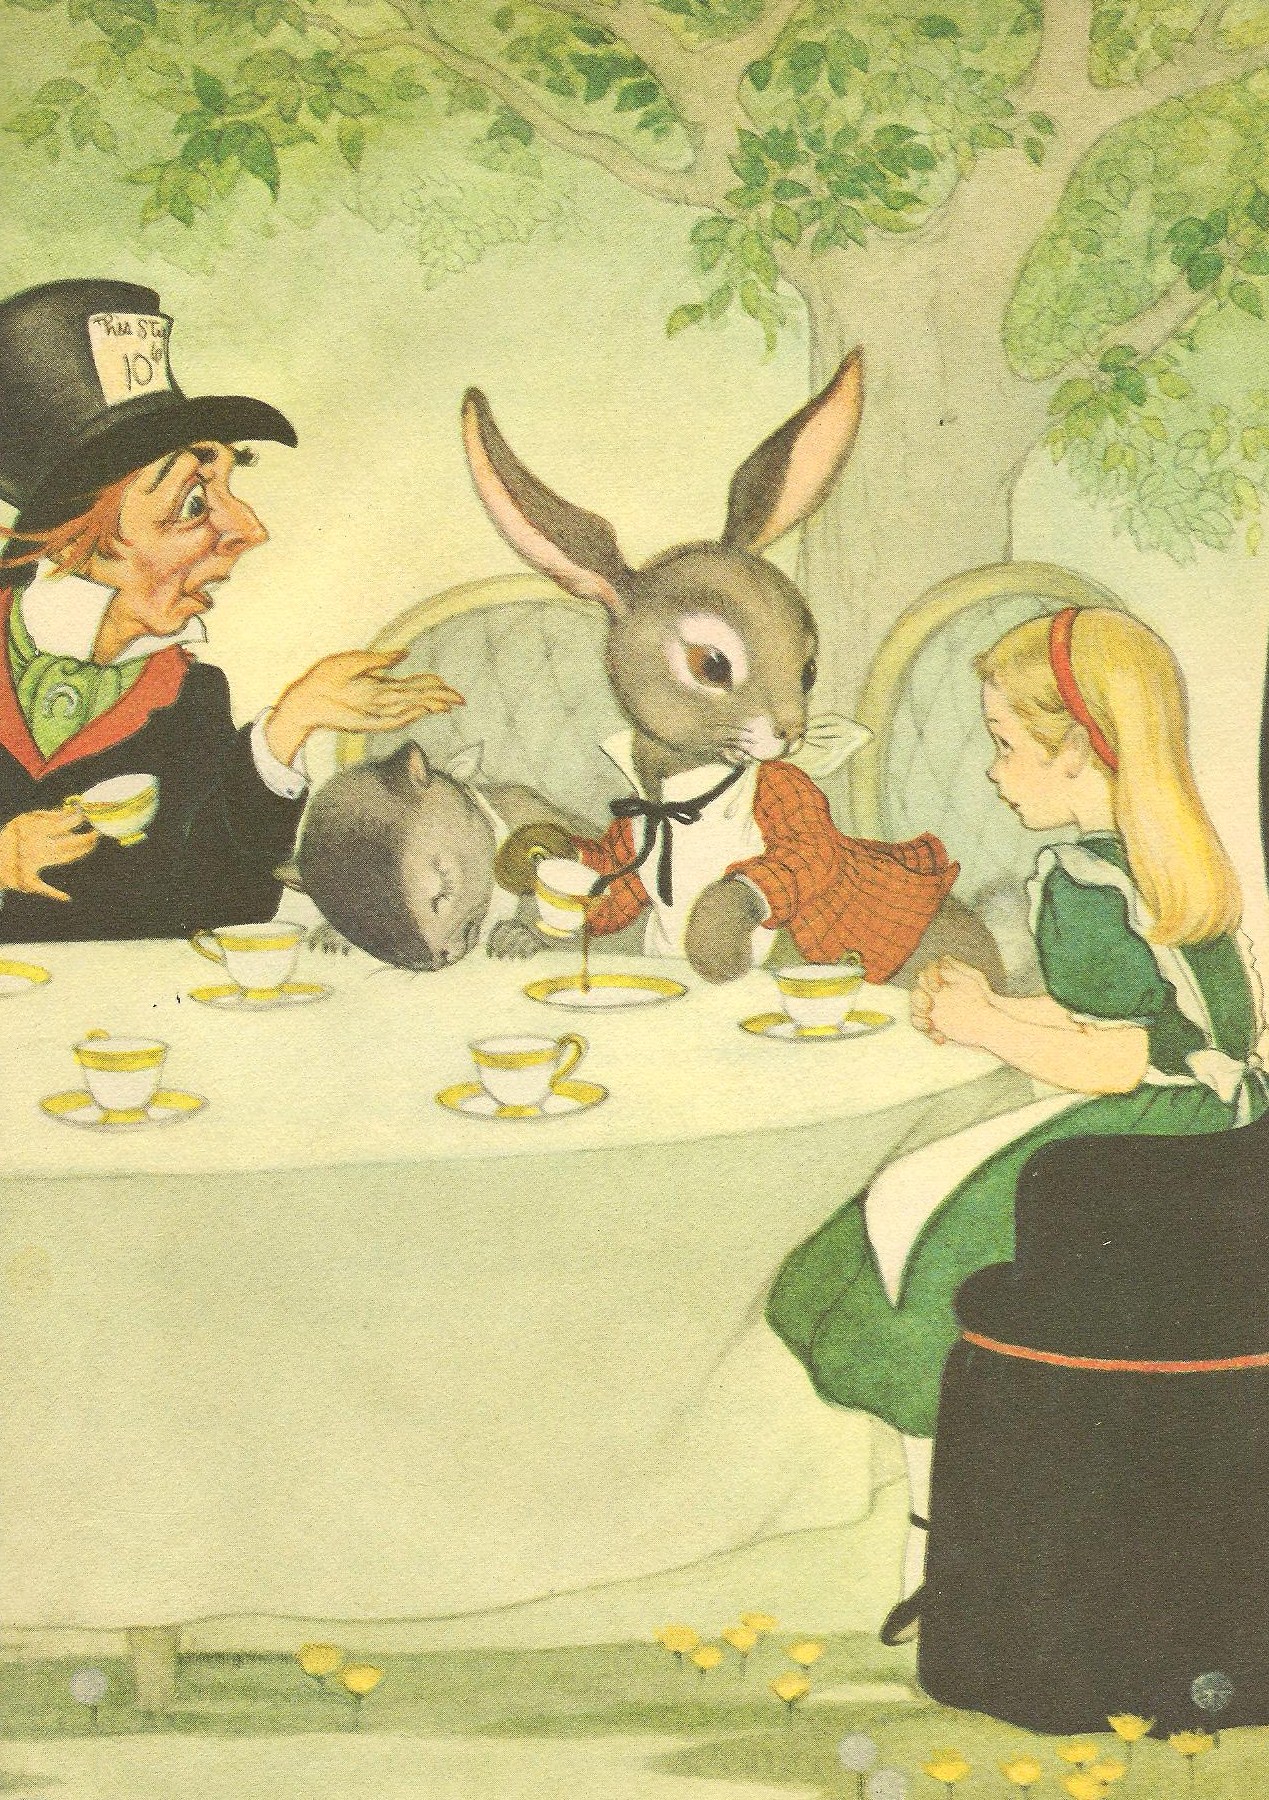 the rabbit came to dinner to eat his master and lady